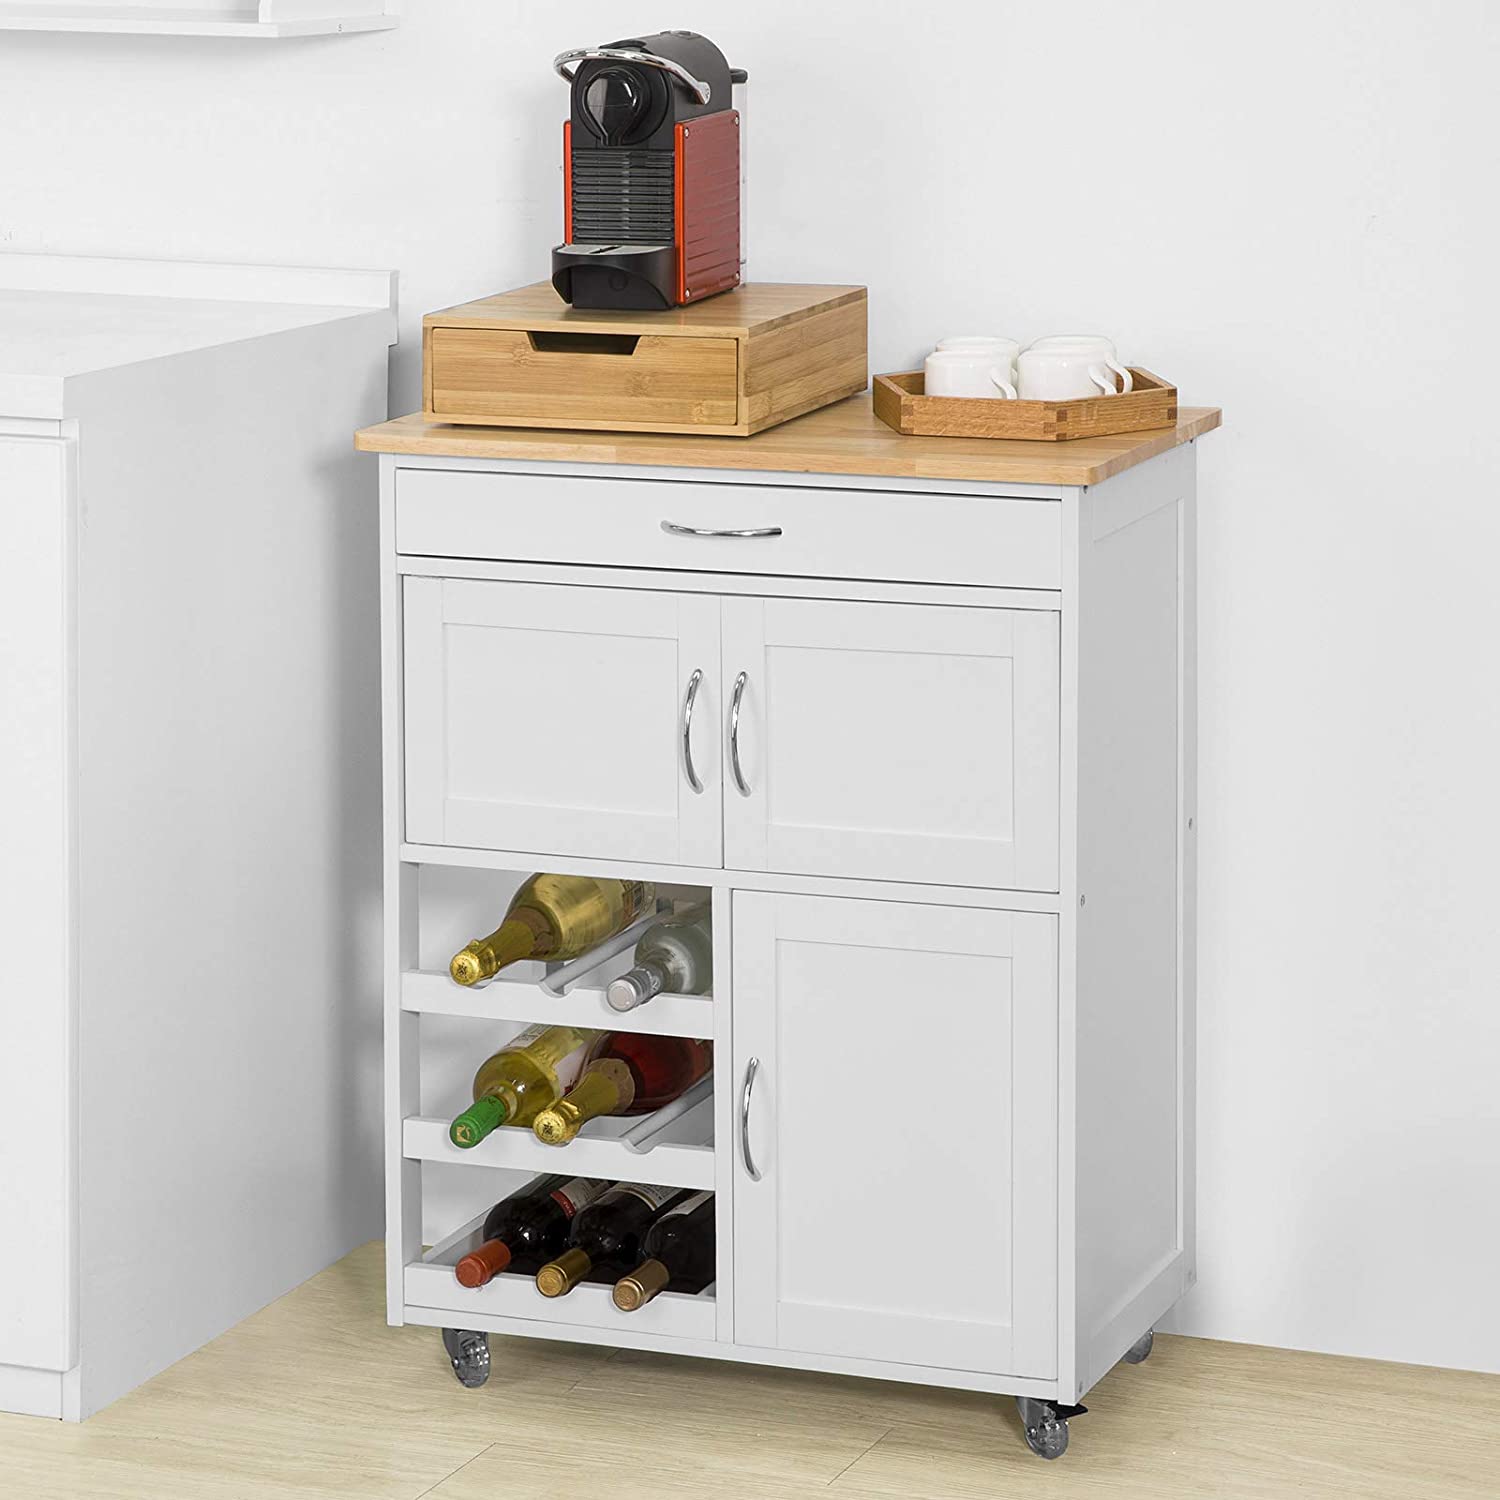 Kitchen Trolley with Wine Racks, Portable Workbench and Serving Cart for Bar or Dining - image3